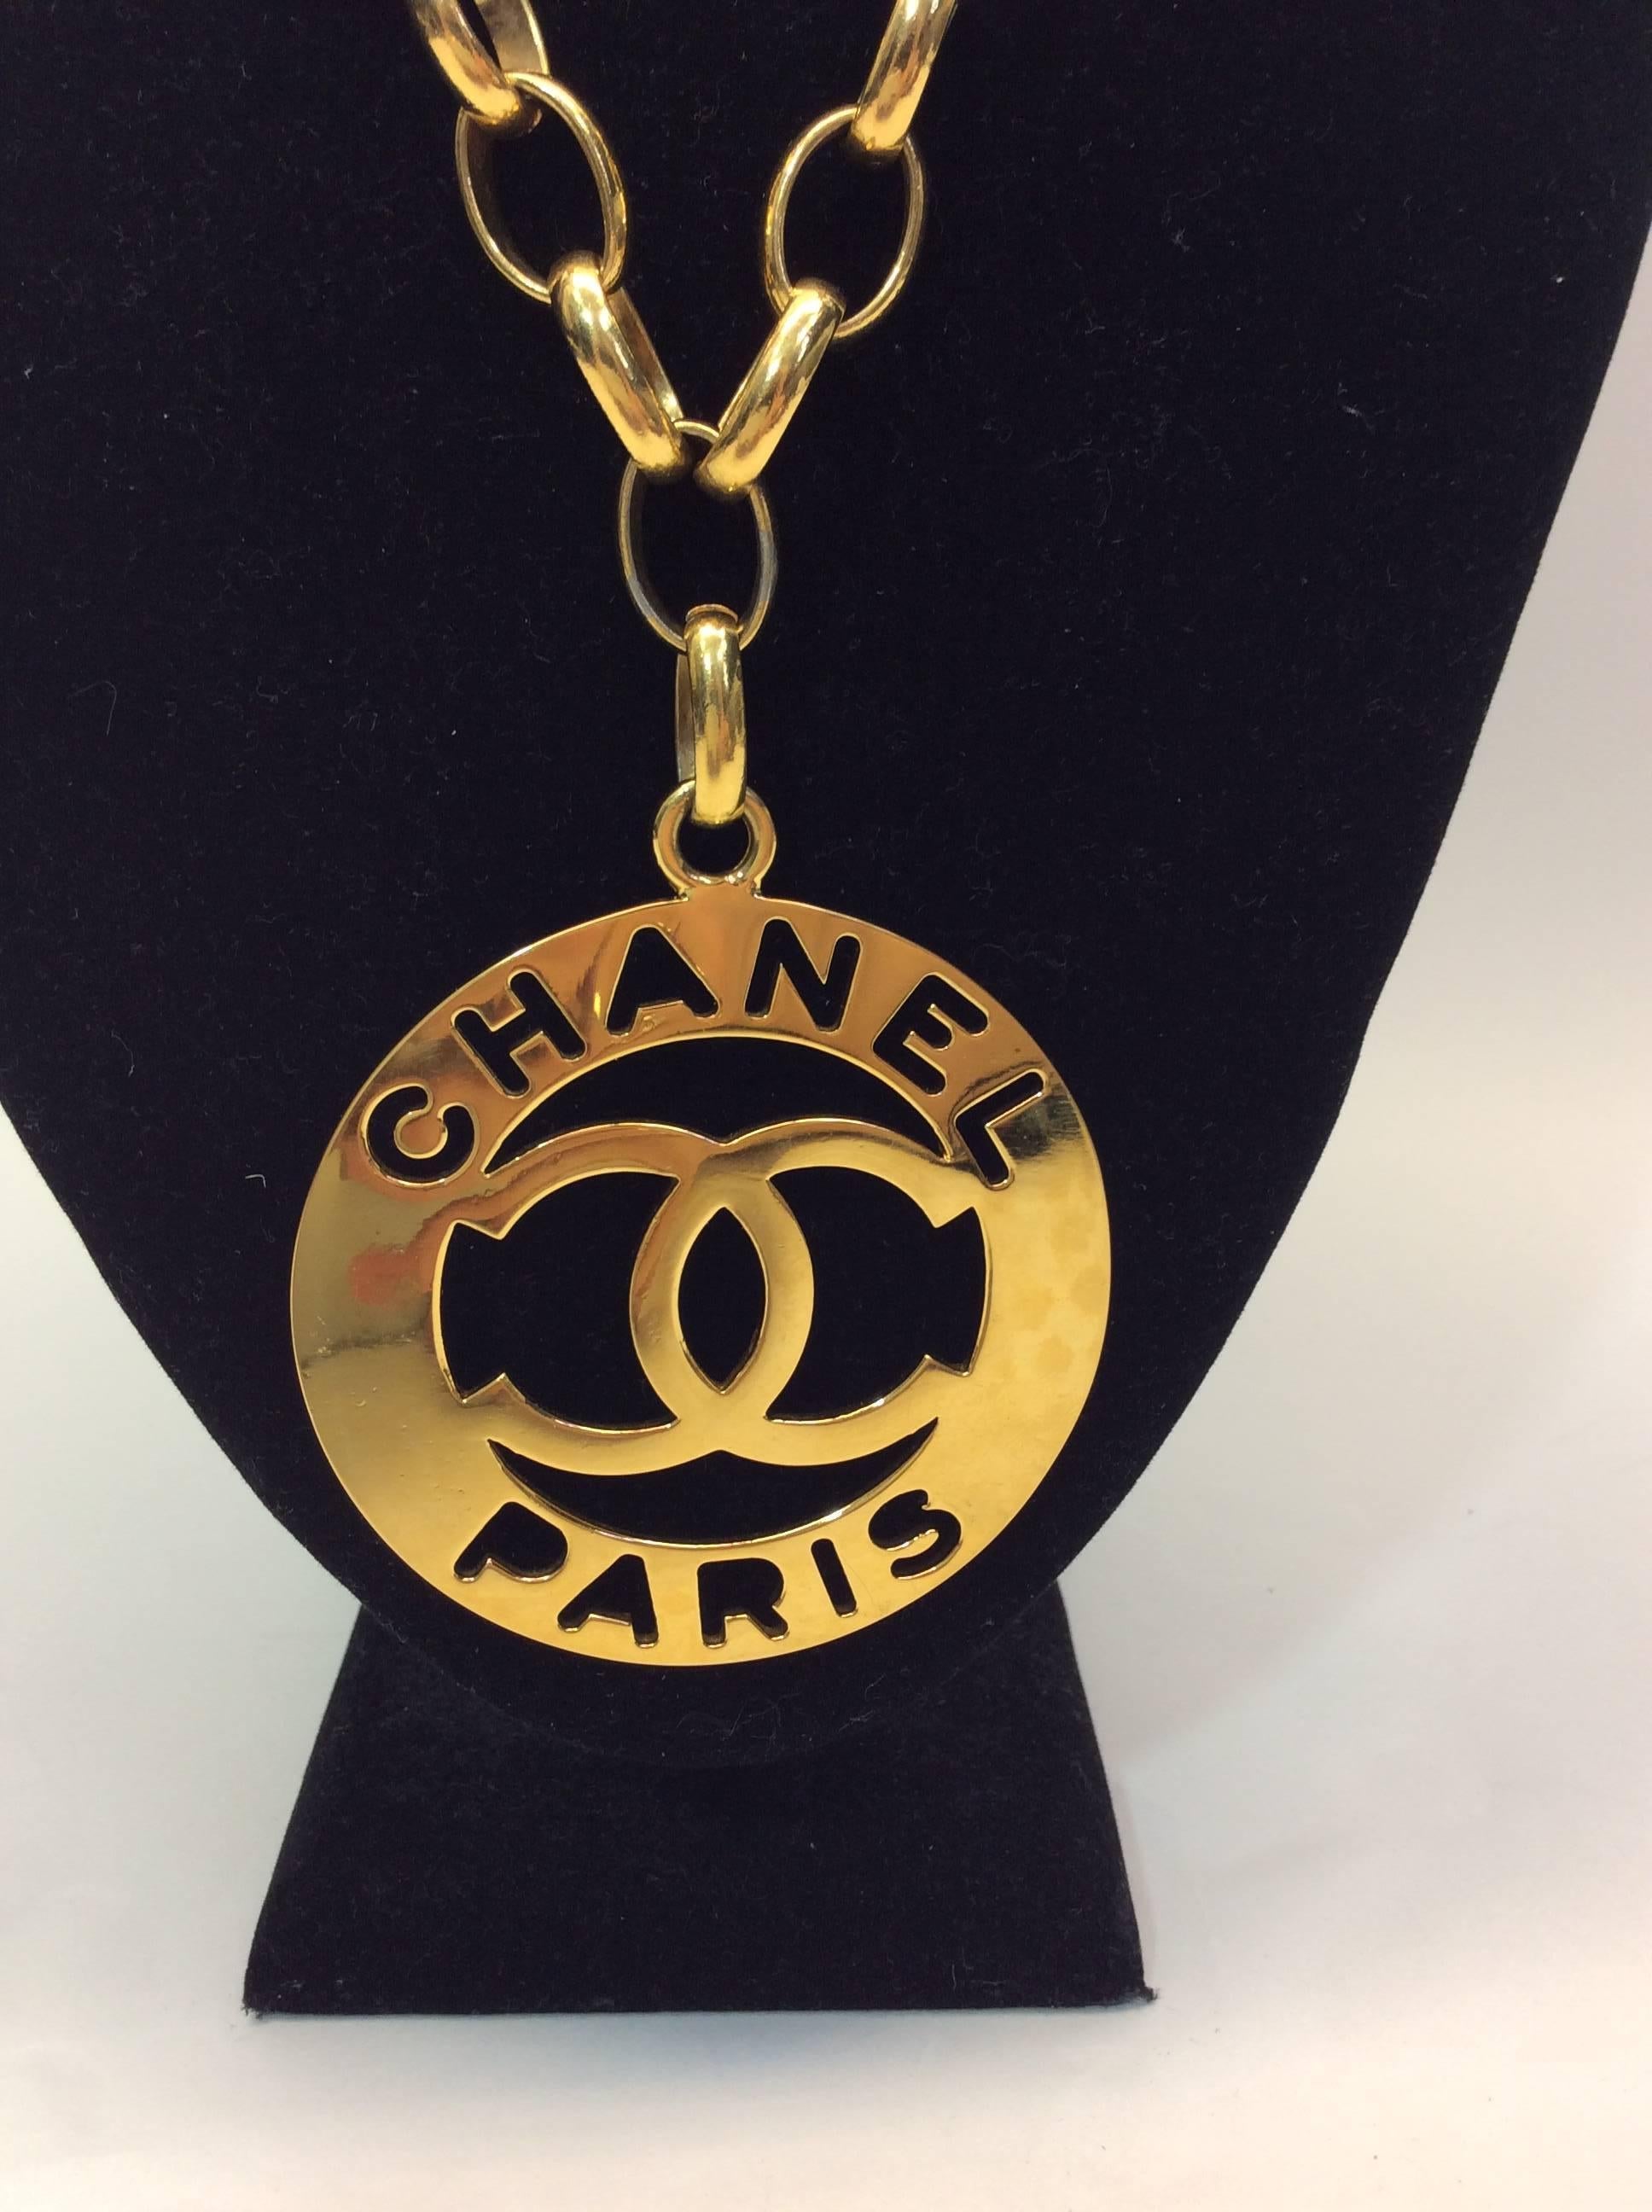 Gold Plated Logo Medallion Necklace
32 inch adjustable chain
3.5 inch medallion diameter
Sterling silver with less than 10k gold plating
Chanel Paris logo design on medallion
